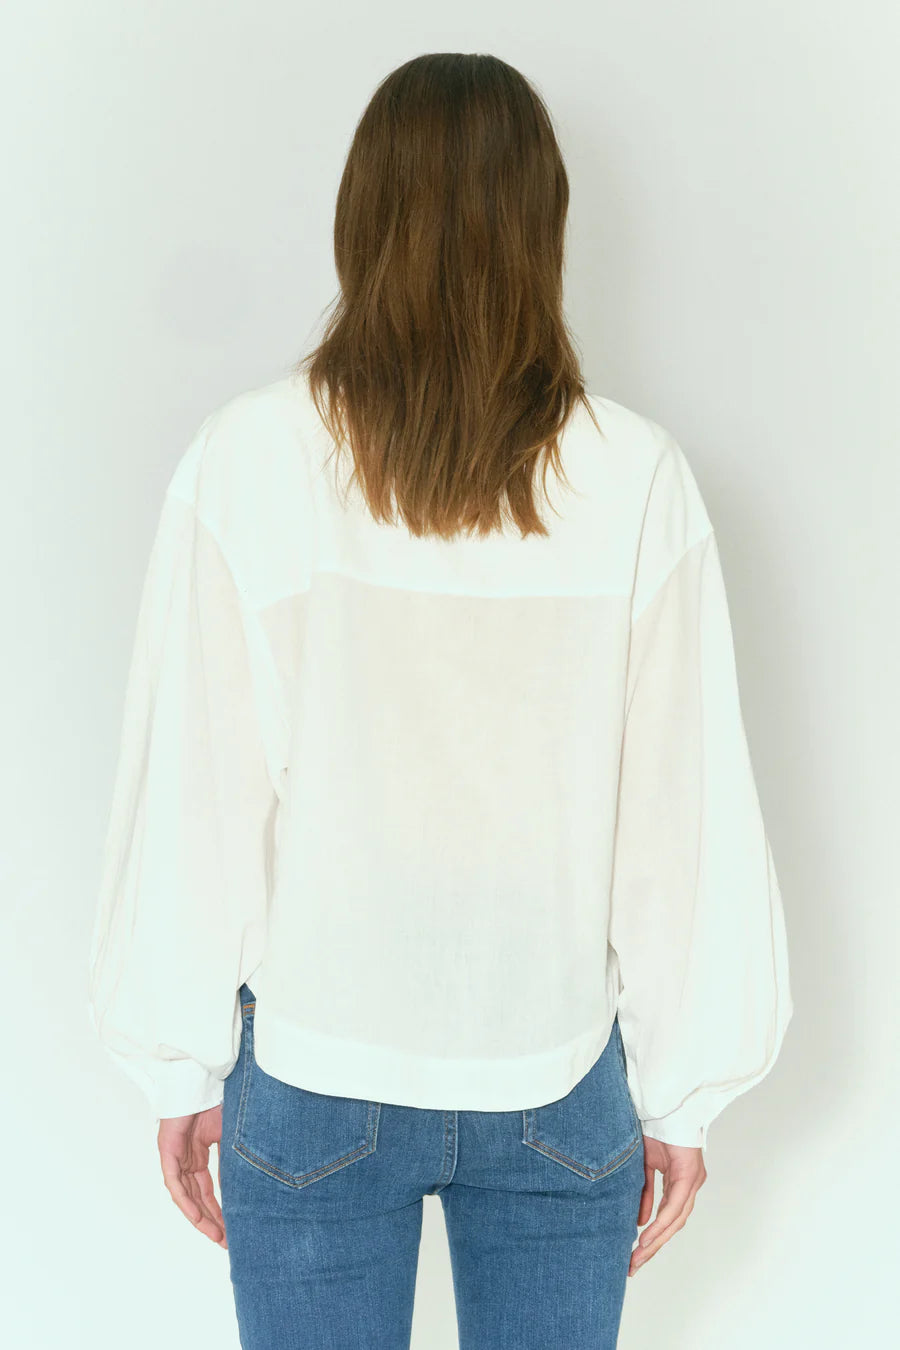 The back view of a woman wearing Tomorrow Denim's Sienna Supersized Shirt - Ecru and a white blouse made from organic cotton.